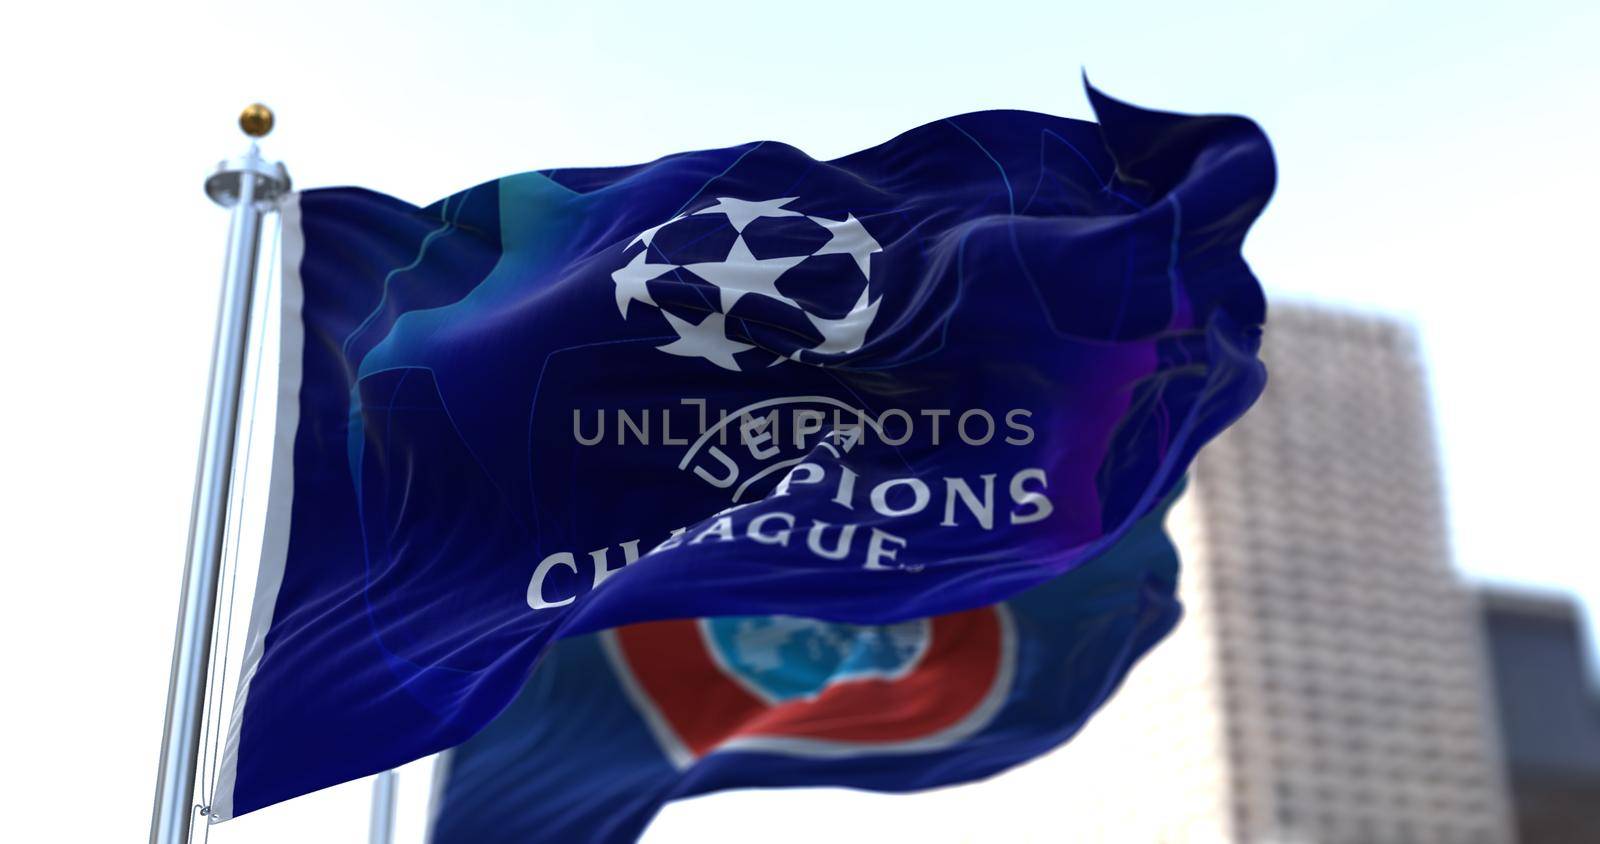 Nyon, SWI, May 2021: The flag of Champions League flapping in the wind with the UEFA flag blurred in the background. Champions League is the most important football tournament between European teams